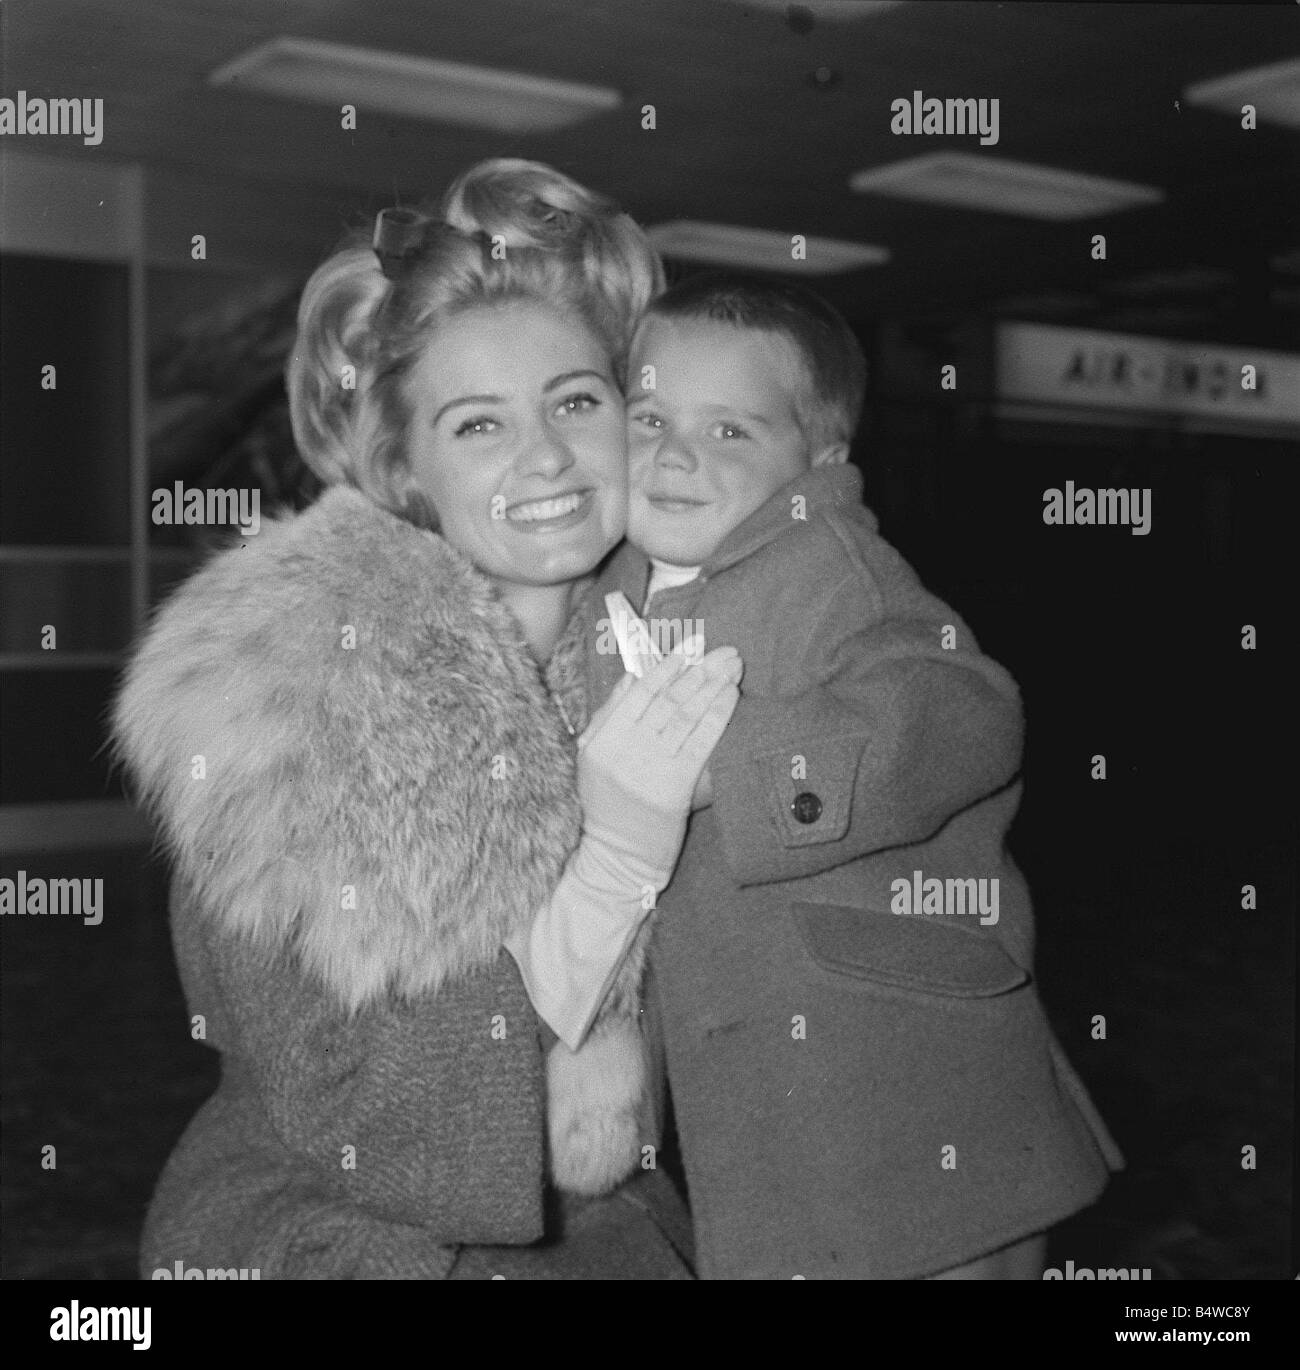 Jill Ireland Actress and son Paul age 4 arriving at London Airport 8 3 99 Q8347 Box 142 Actress Jill Ireland with her young son Stock Photo